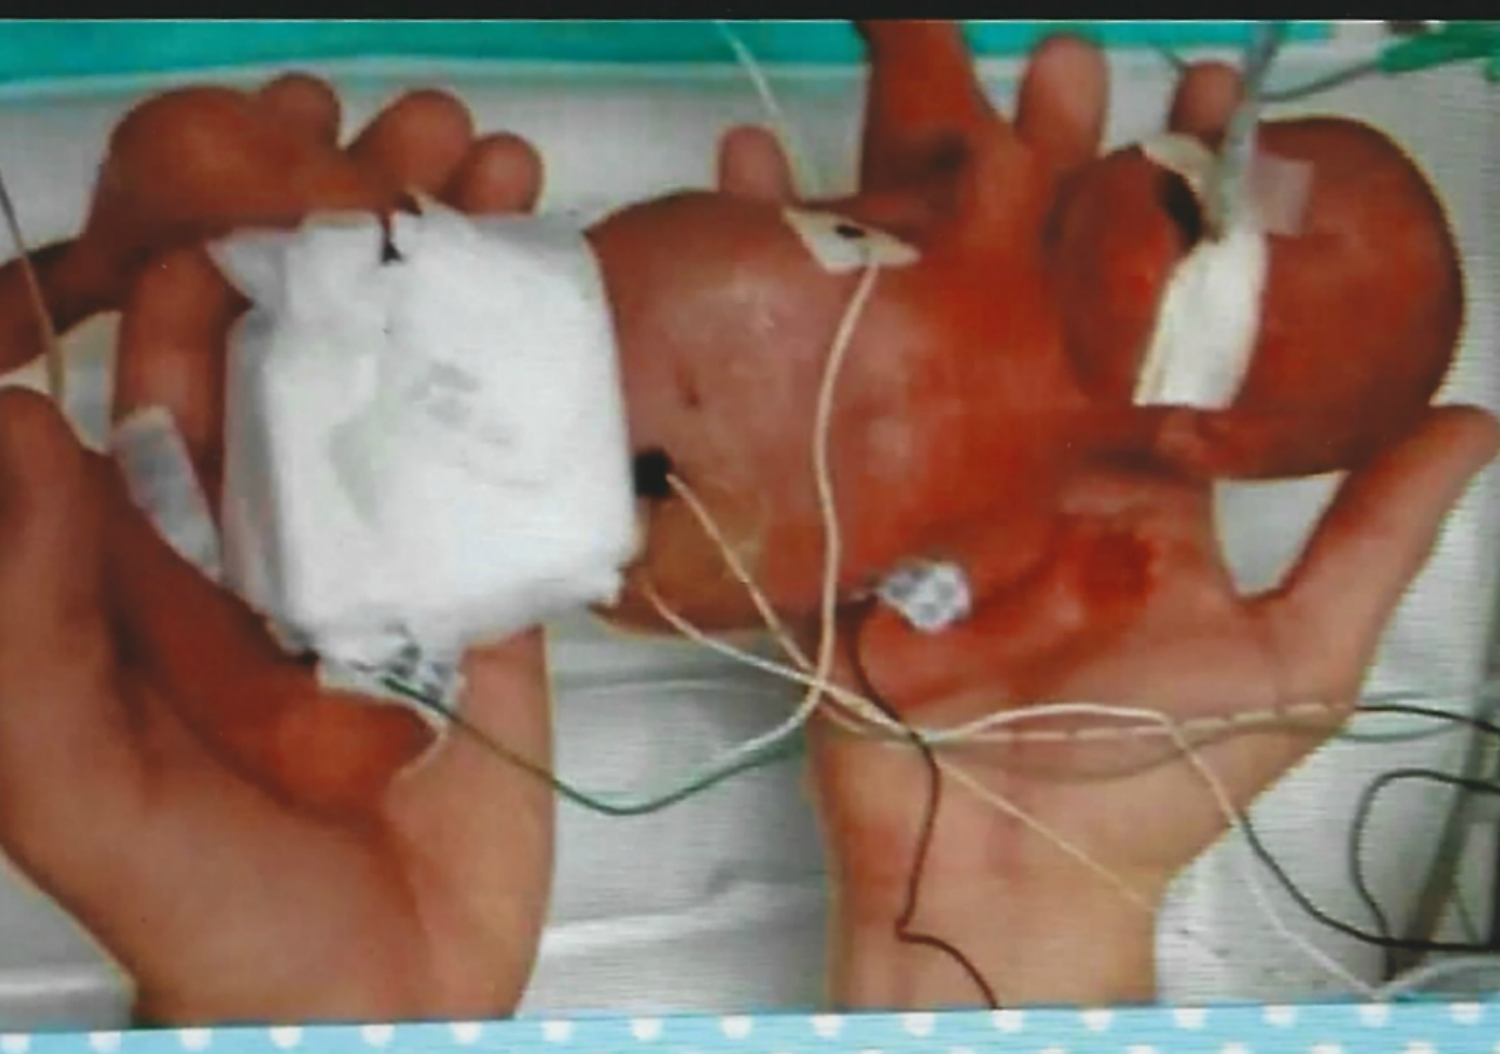 Tori was born at 24 weeks gestation, weighing 1.7 pounds.